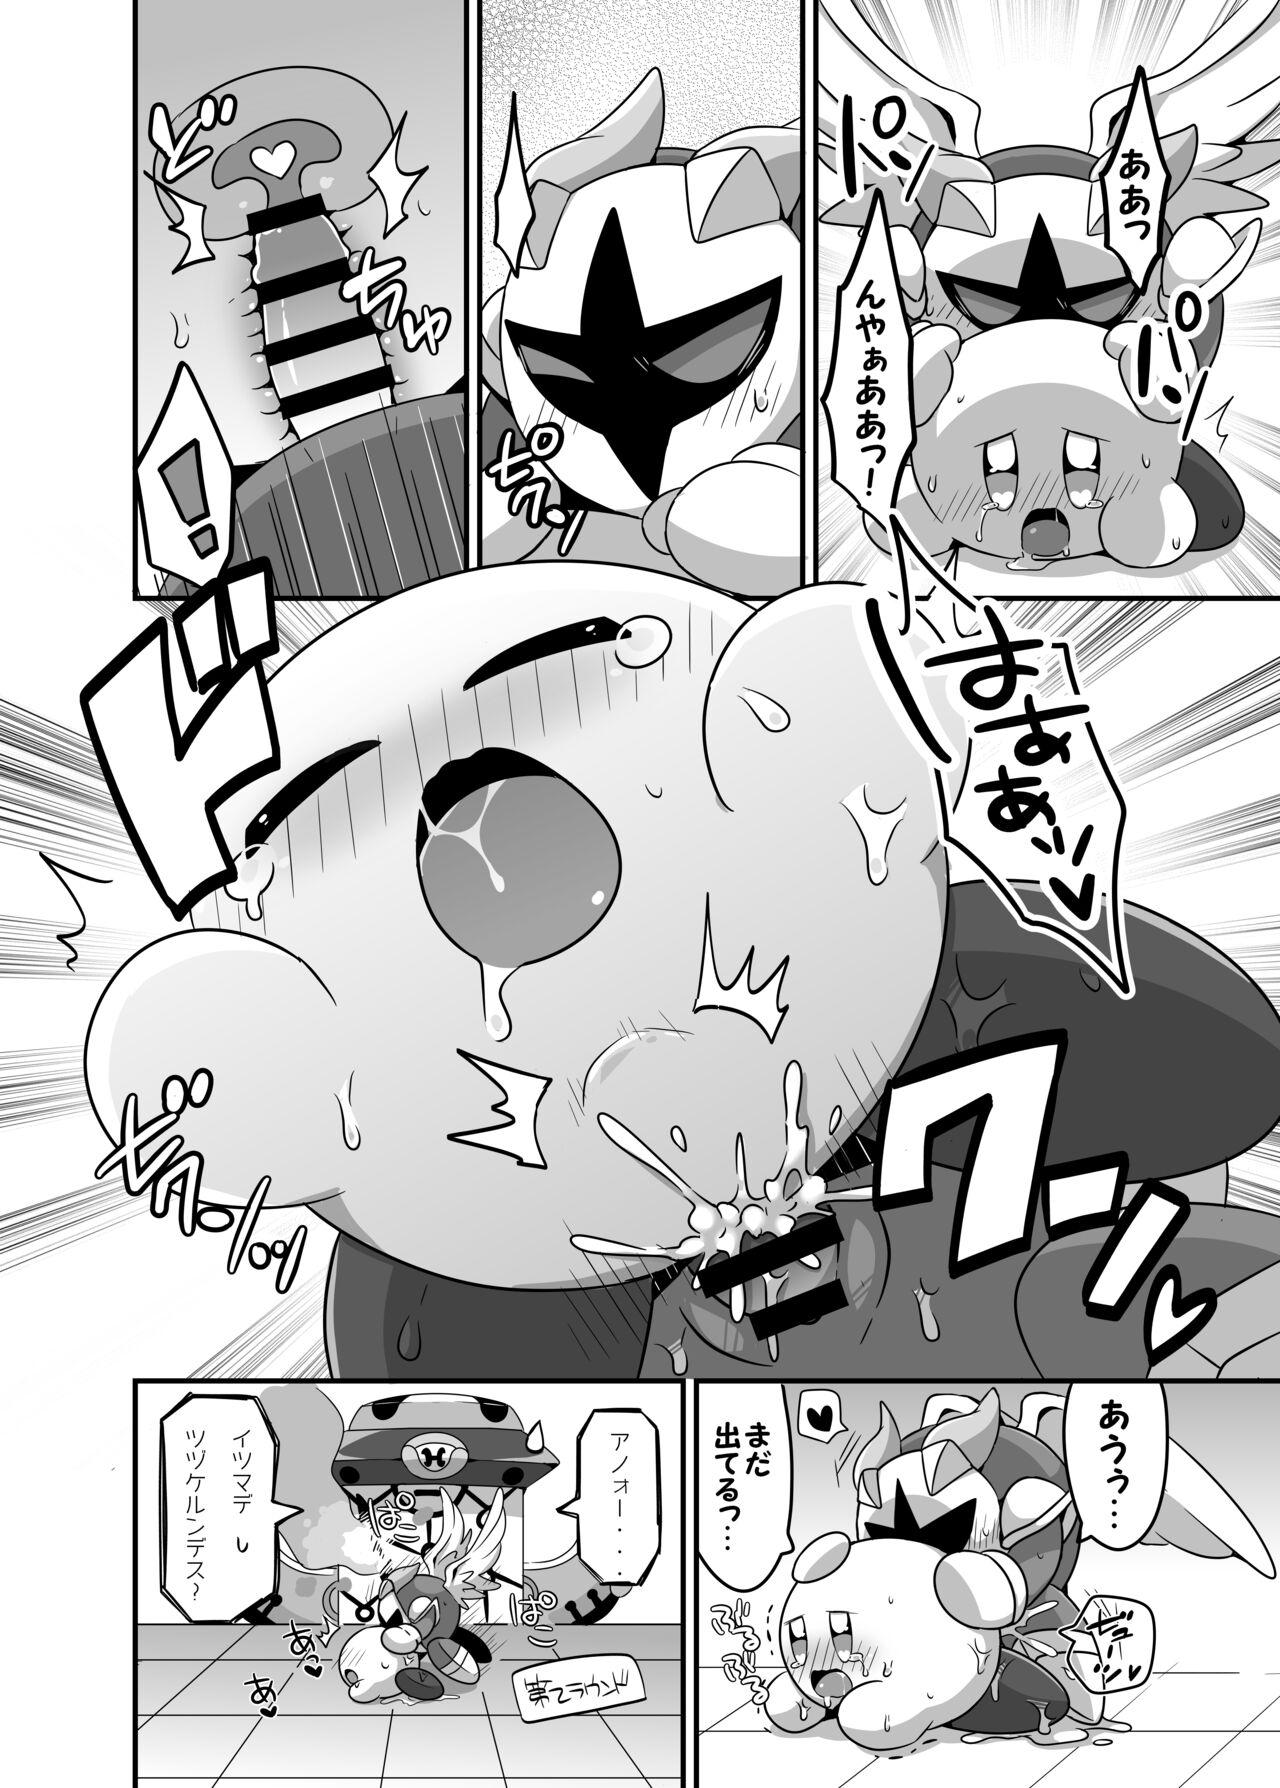 Reversecowgirl I Want to Do XXX Even For Spheres! - Kirby Threesome - Page 6